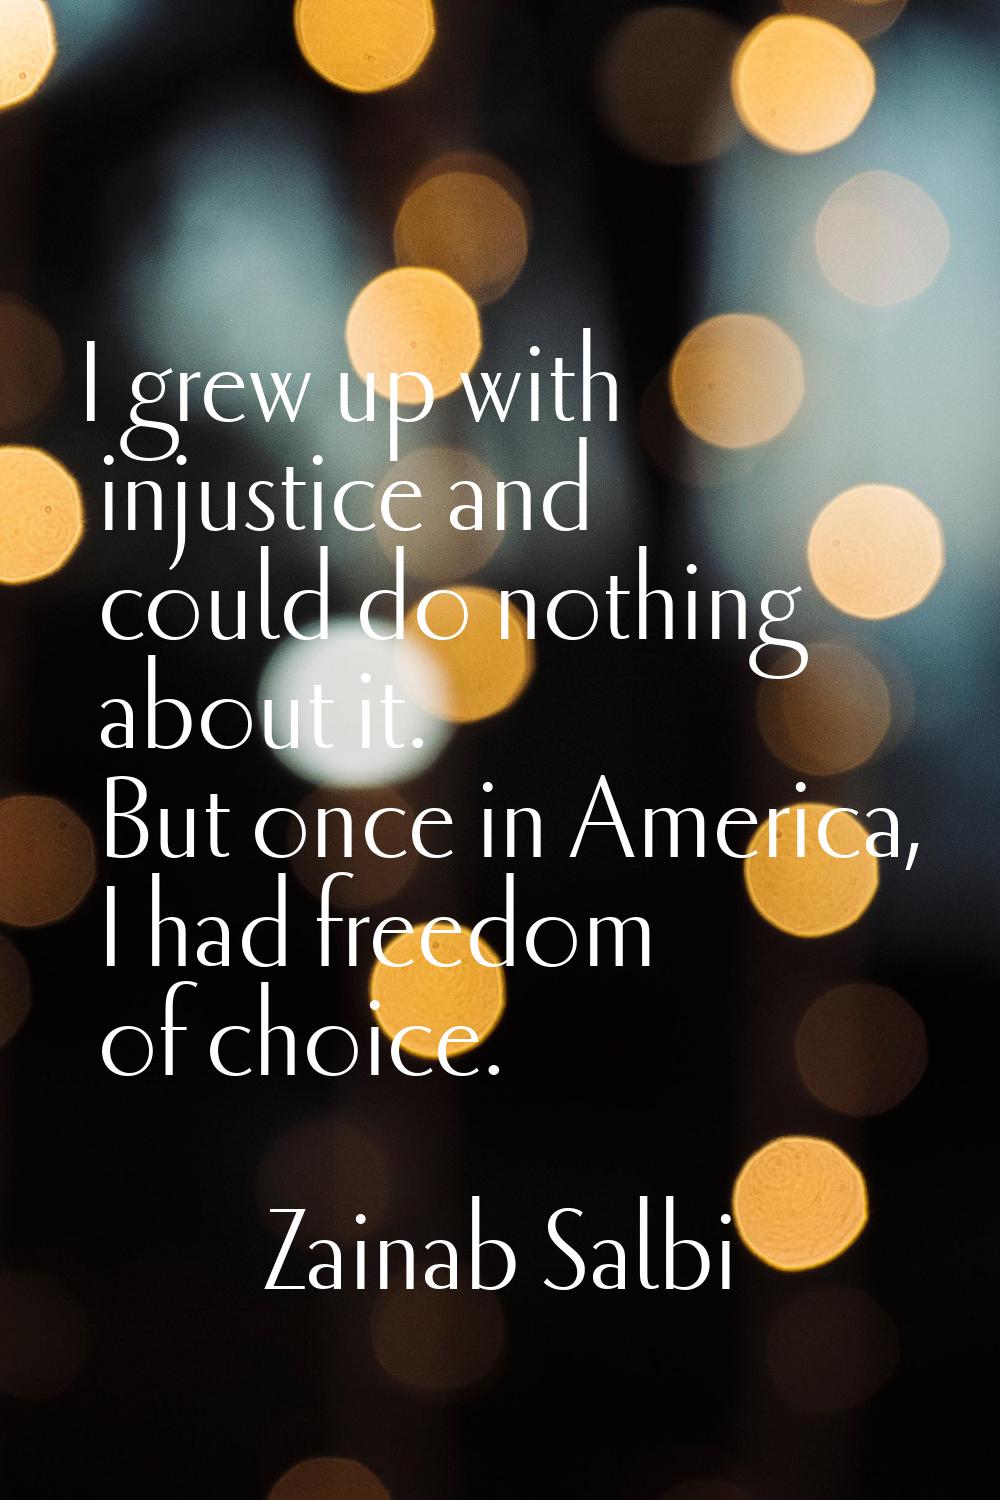 I grew up with injustice and could do nothing about it. But once in America, I had freedom of choic